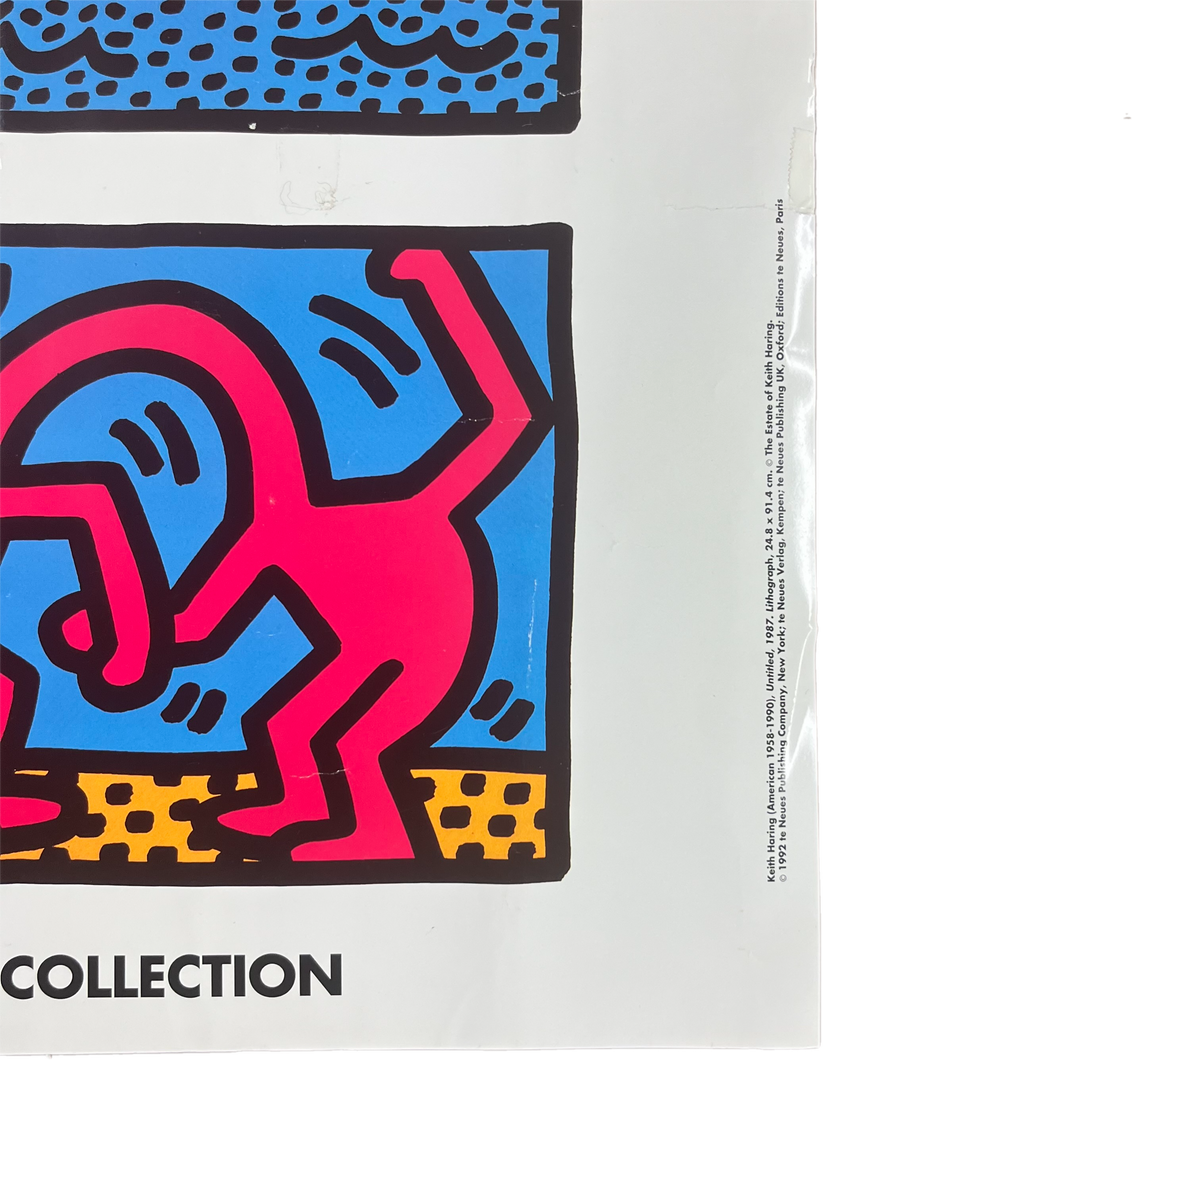 Vintage Keith Haring &quot;Te Neues Publishing&quot; Start Your Own Collection Poster